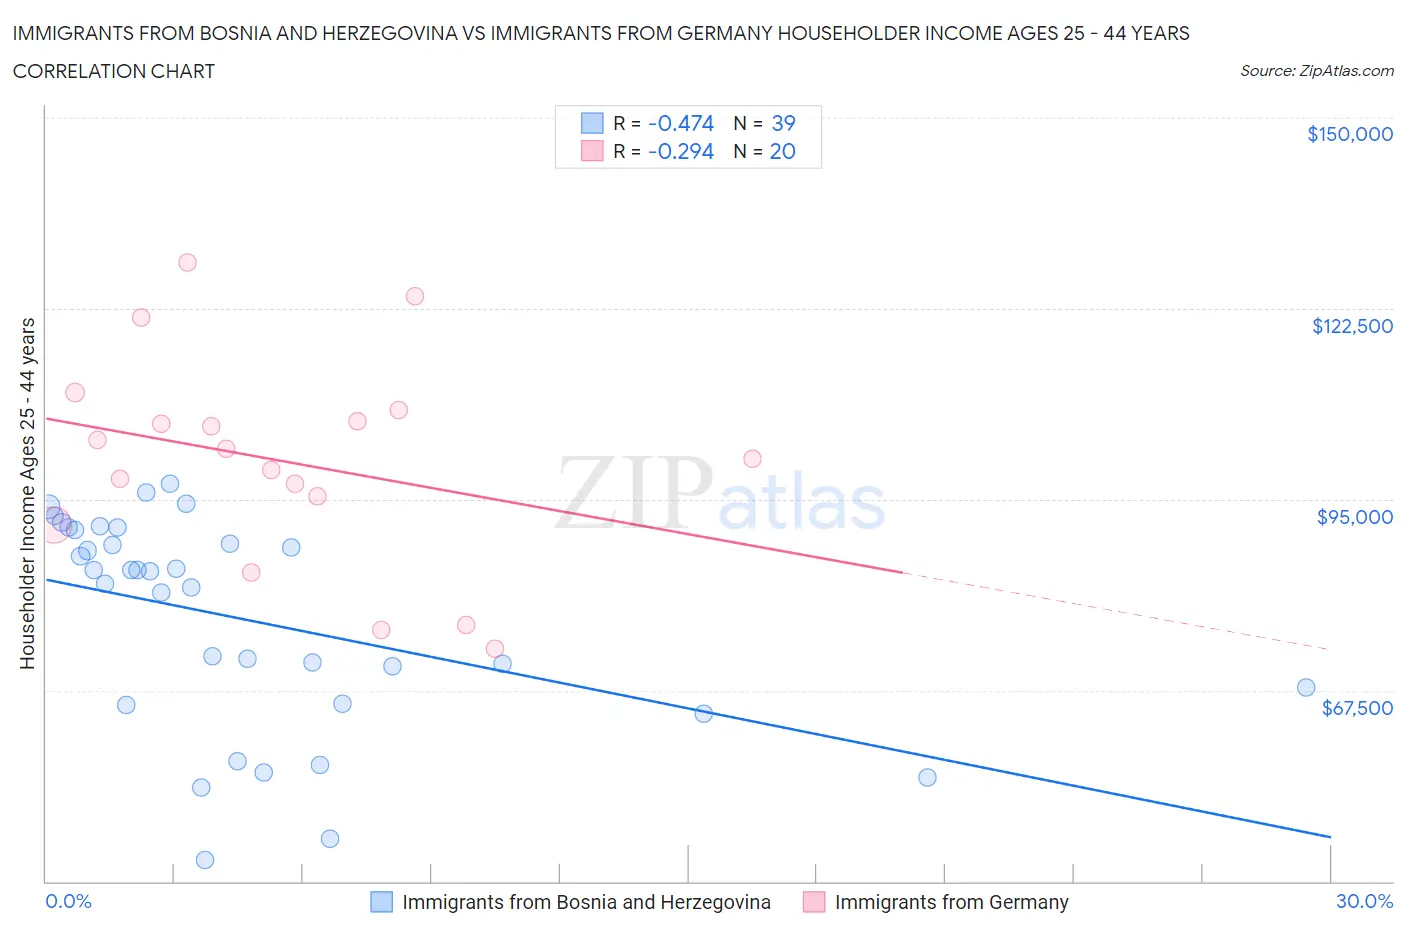 Immigrants from Bosnia and Herzegovina vs Immigrants from Germany Householder Income Ages 25 - 44 years